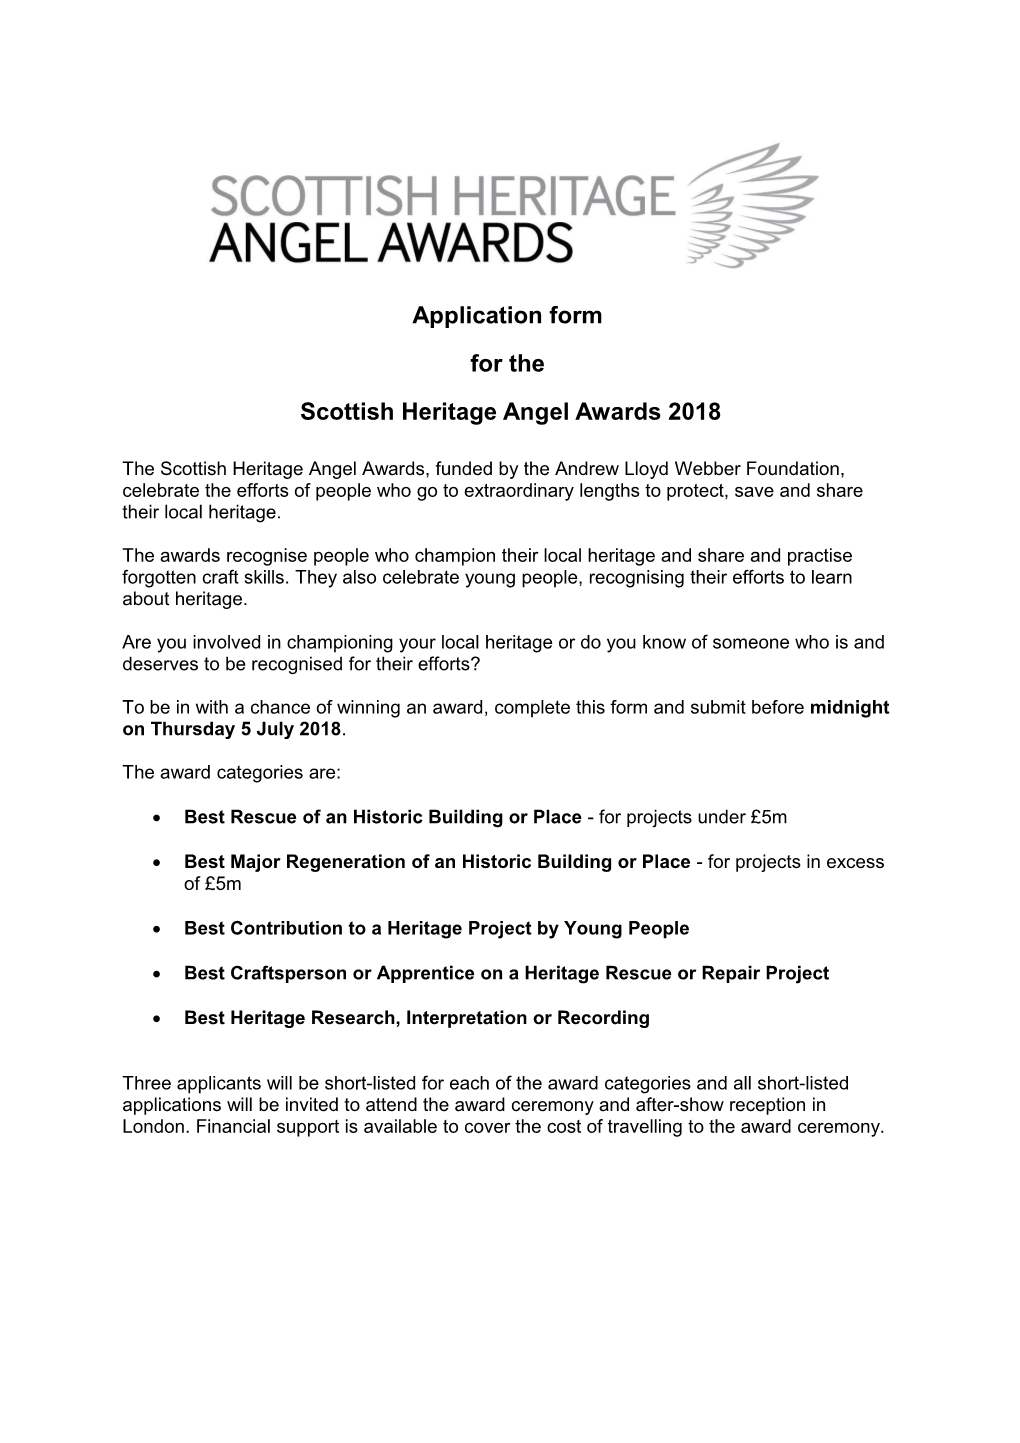 Application Form for the English Heritage Angel Awards 2011